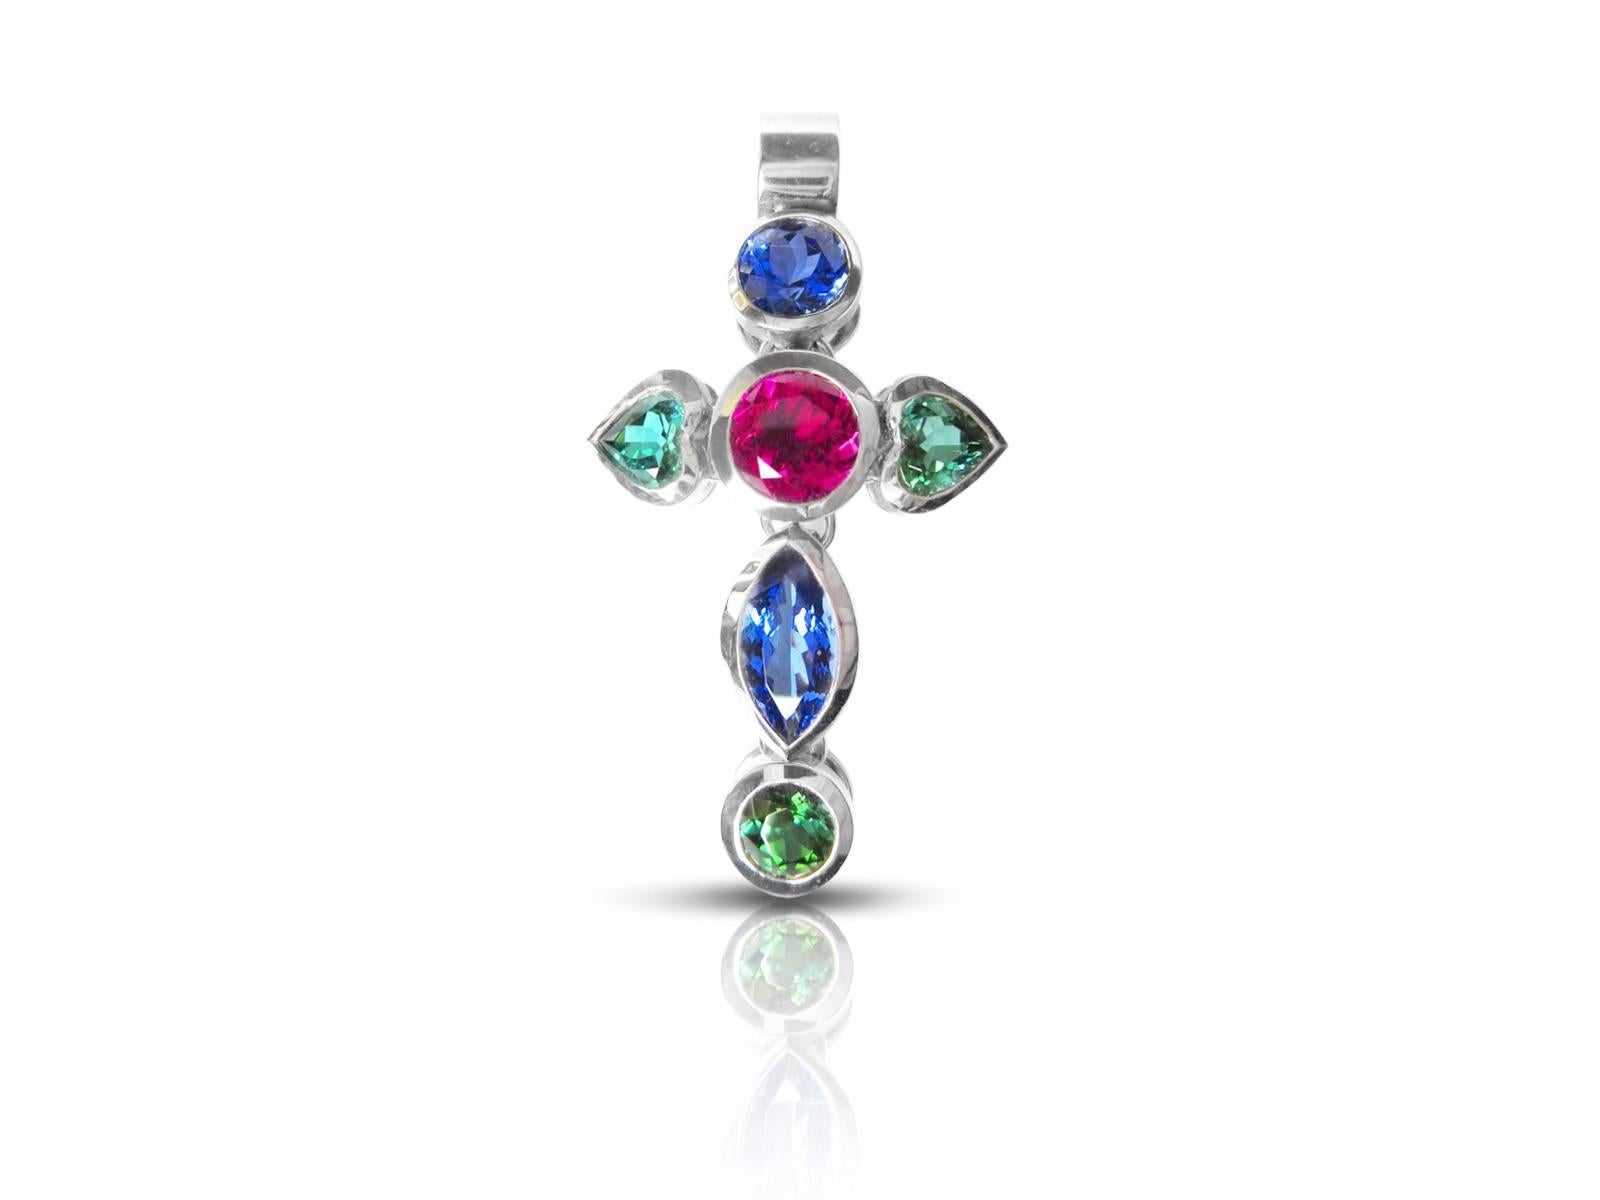 Thomas Leyser is renowned for his contemporary jewellery designs utilizing fine coloured gemstones and diamonds.  

This cross pendant in 18k white gold (14.5g) is set with various fine gemstones (Tanzanites - 3.68ct, Tourmalines - 2.38ct,